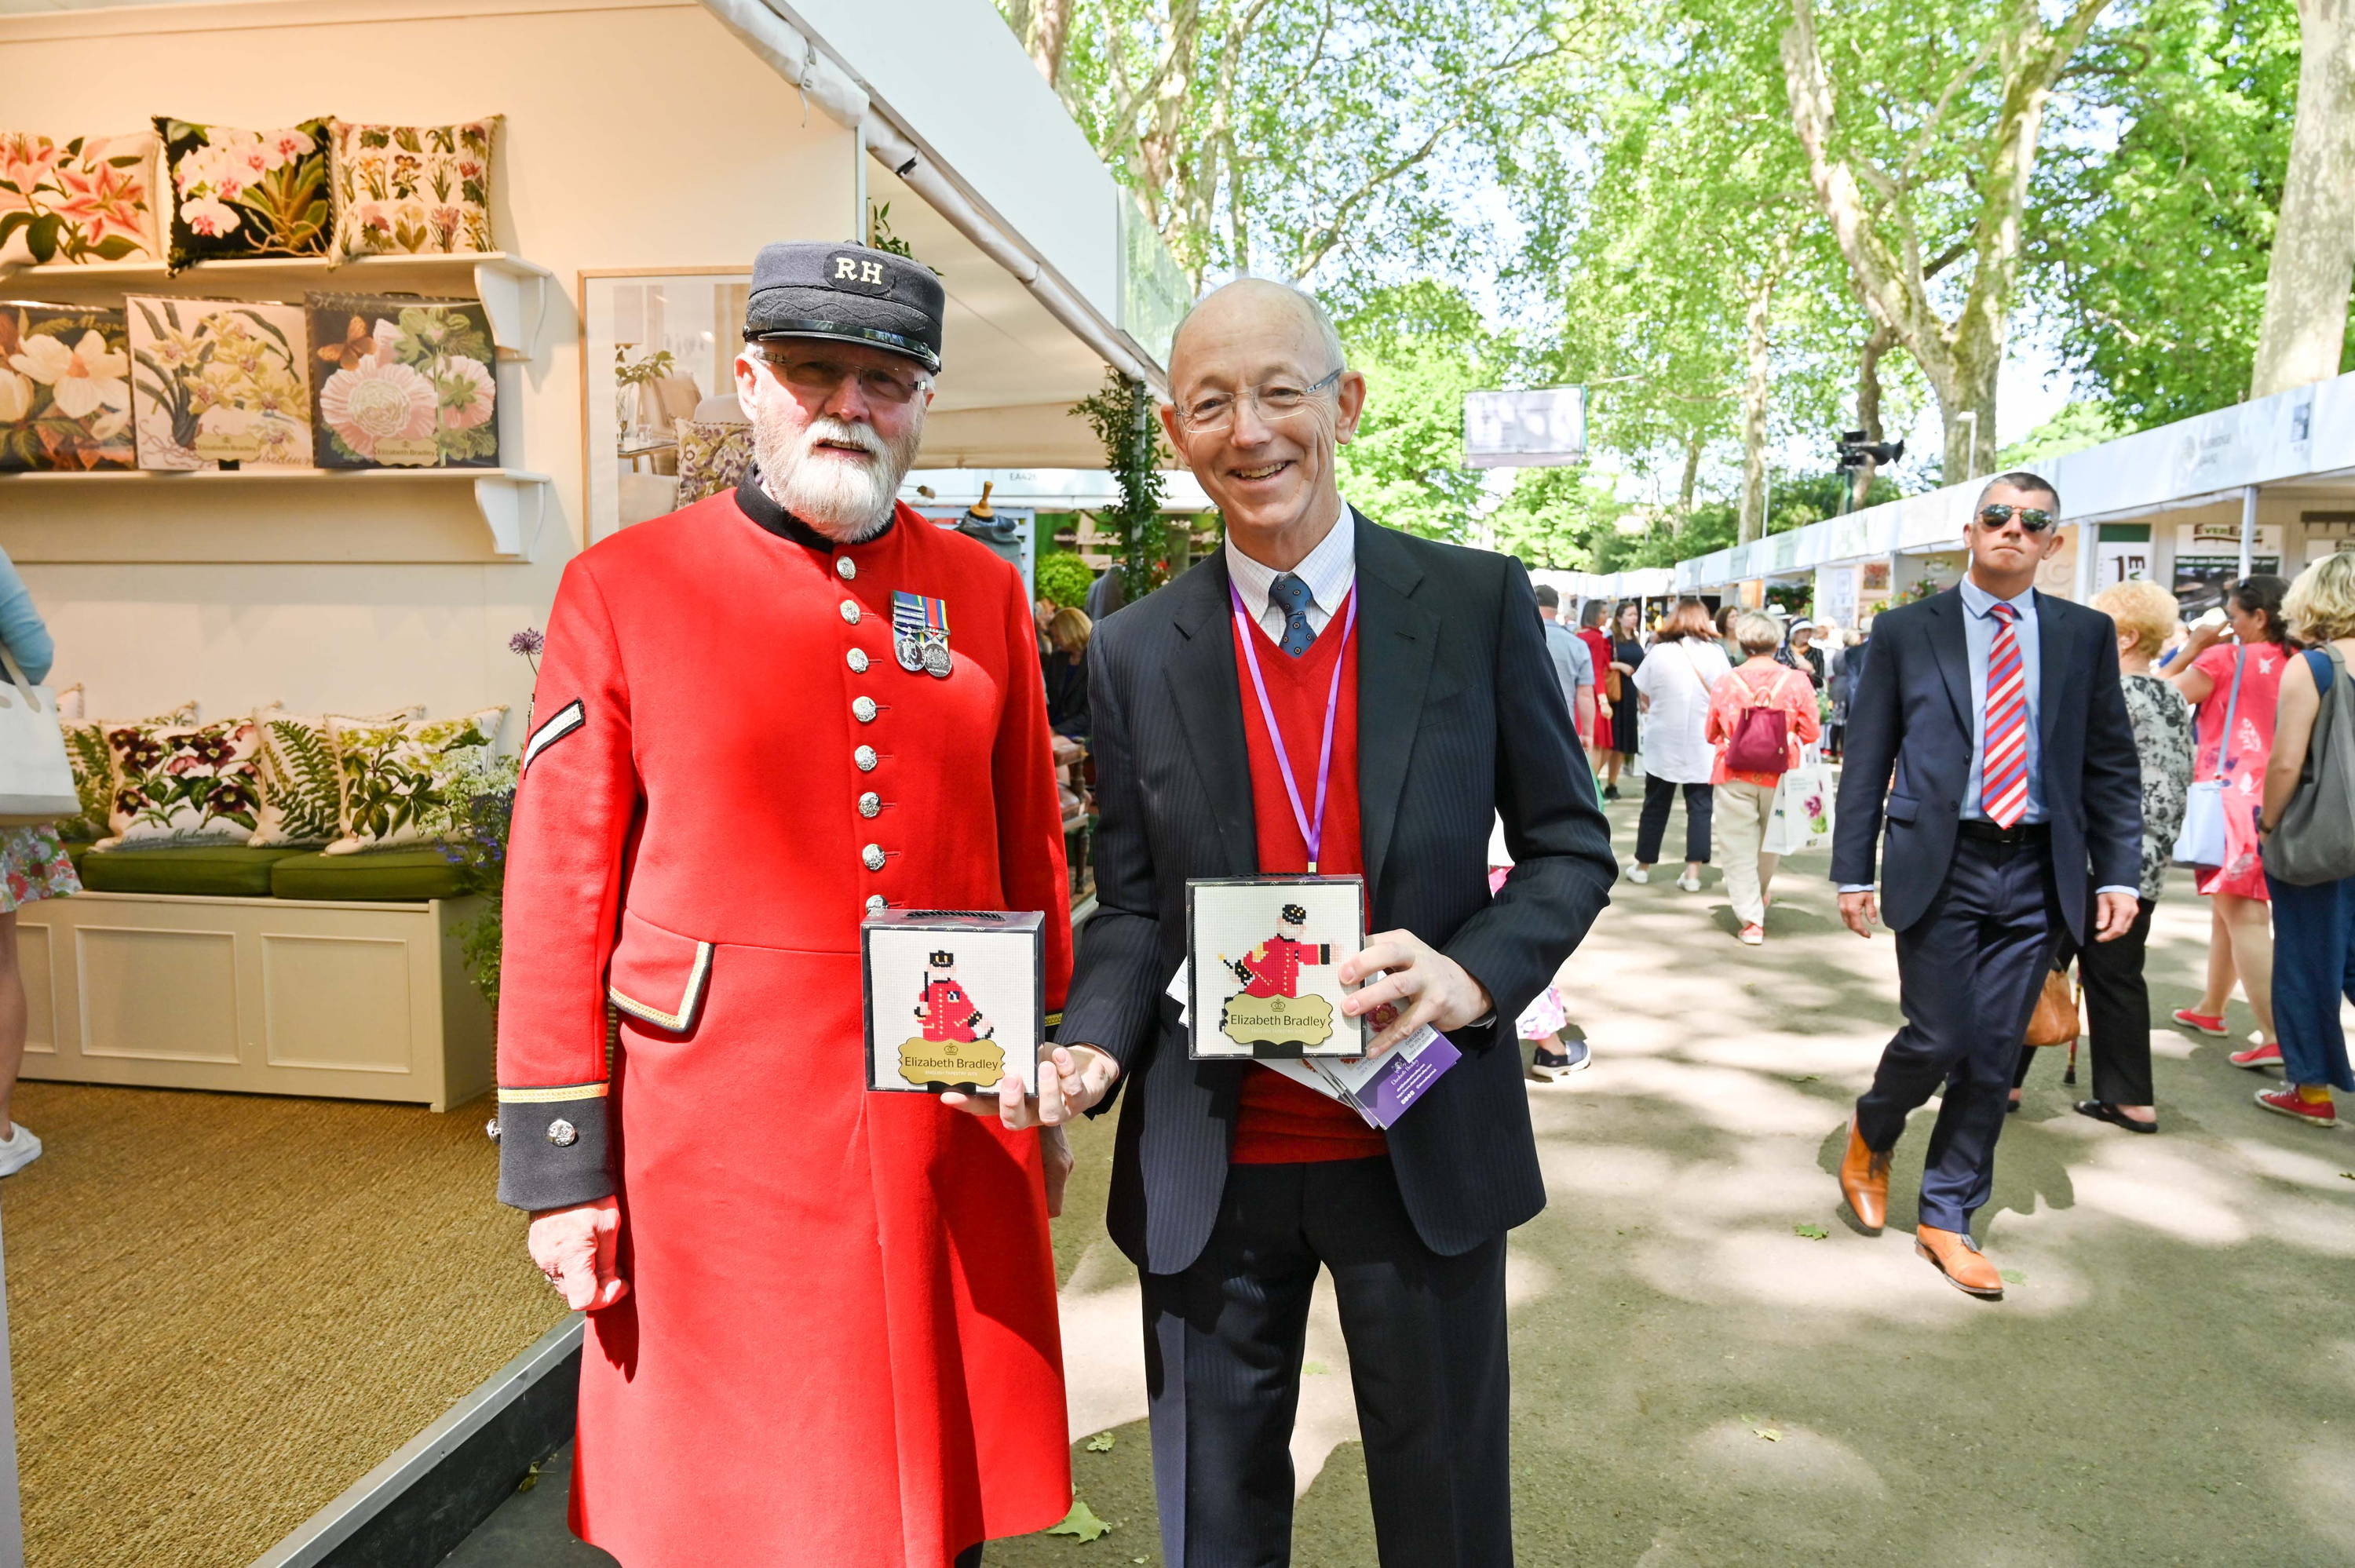 Elizabeth Bradley owner with one of the Chelsea Pensioners